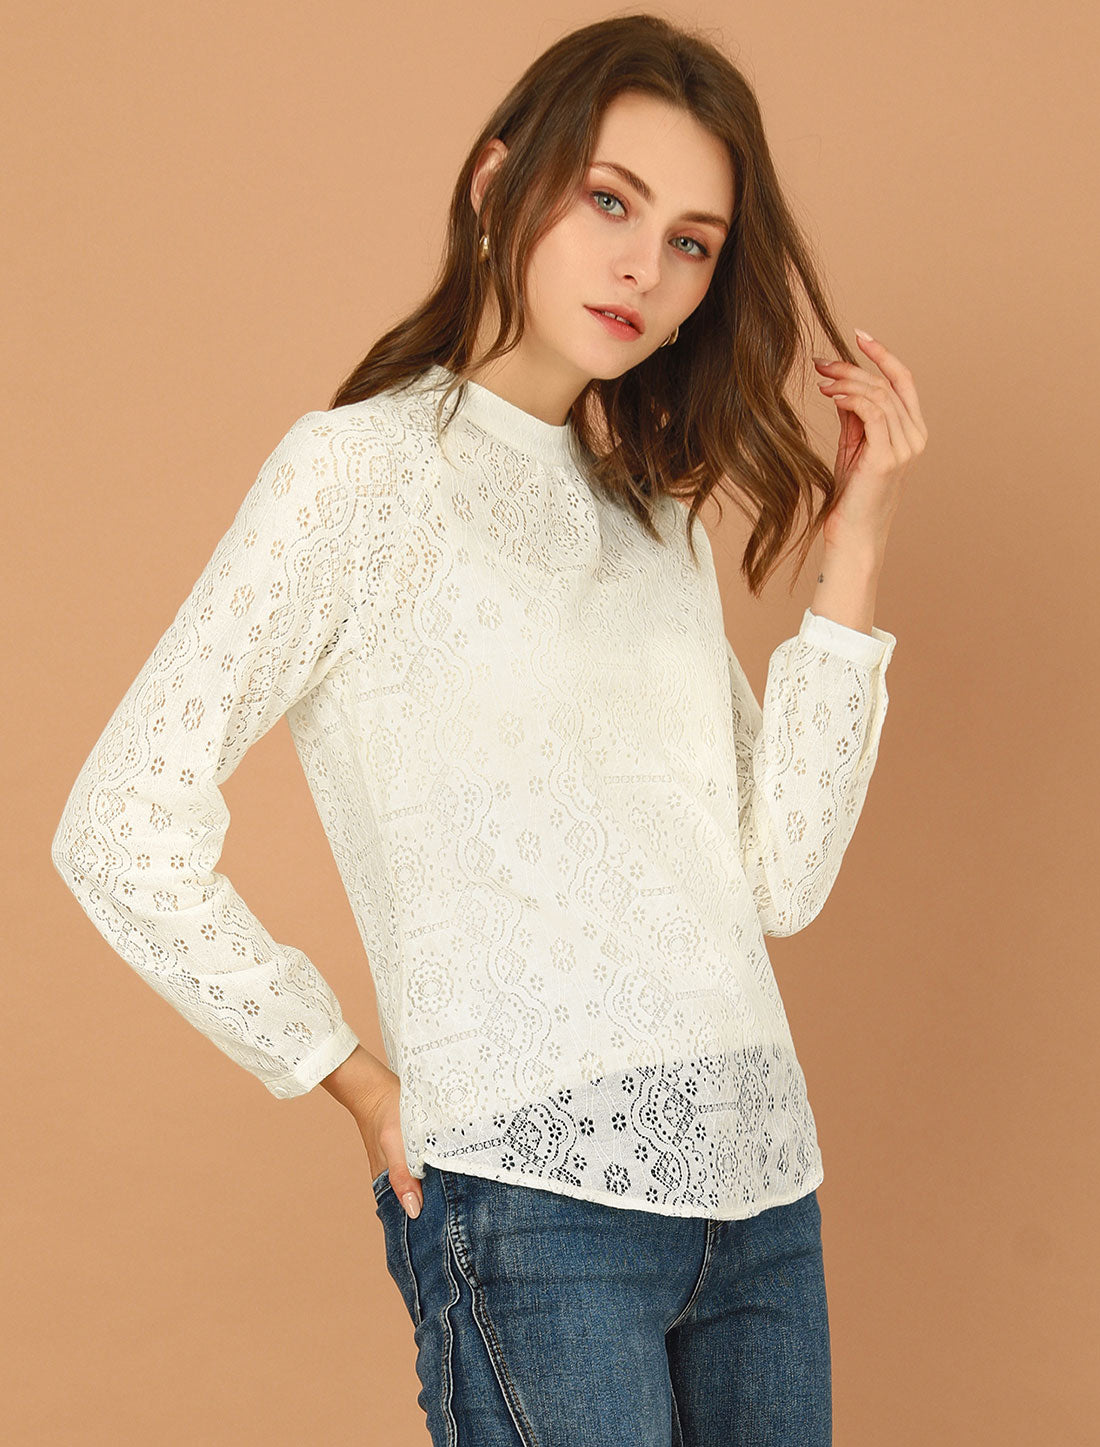 Allegra K Lace Blouse Long Sleeve Floral Vintage Stand Collar Top Shirt